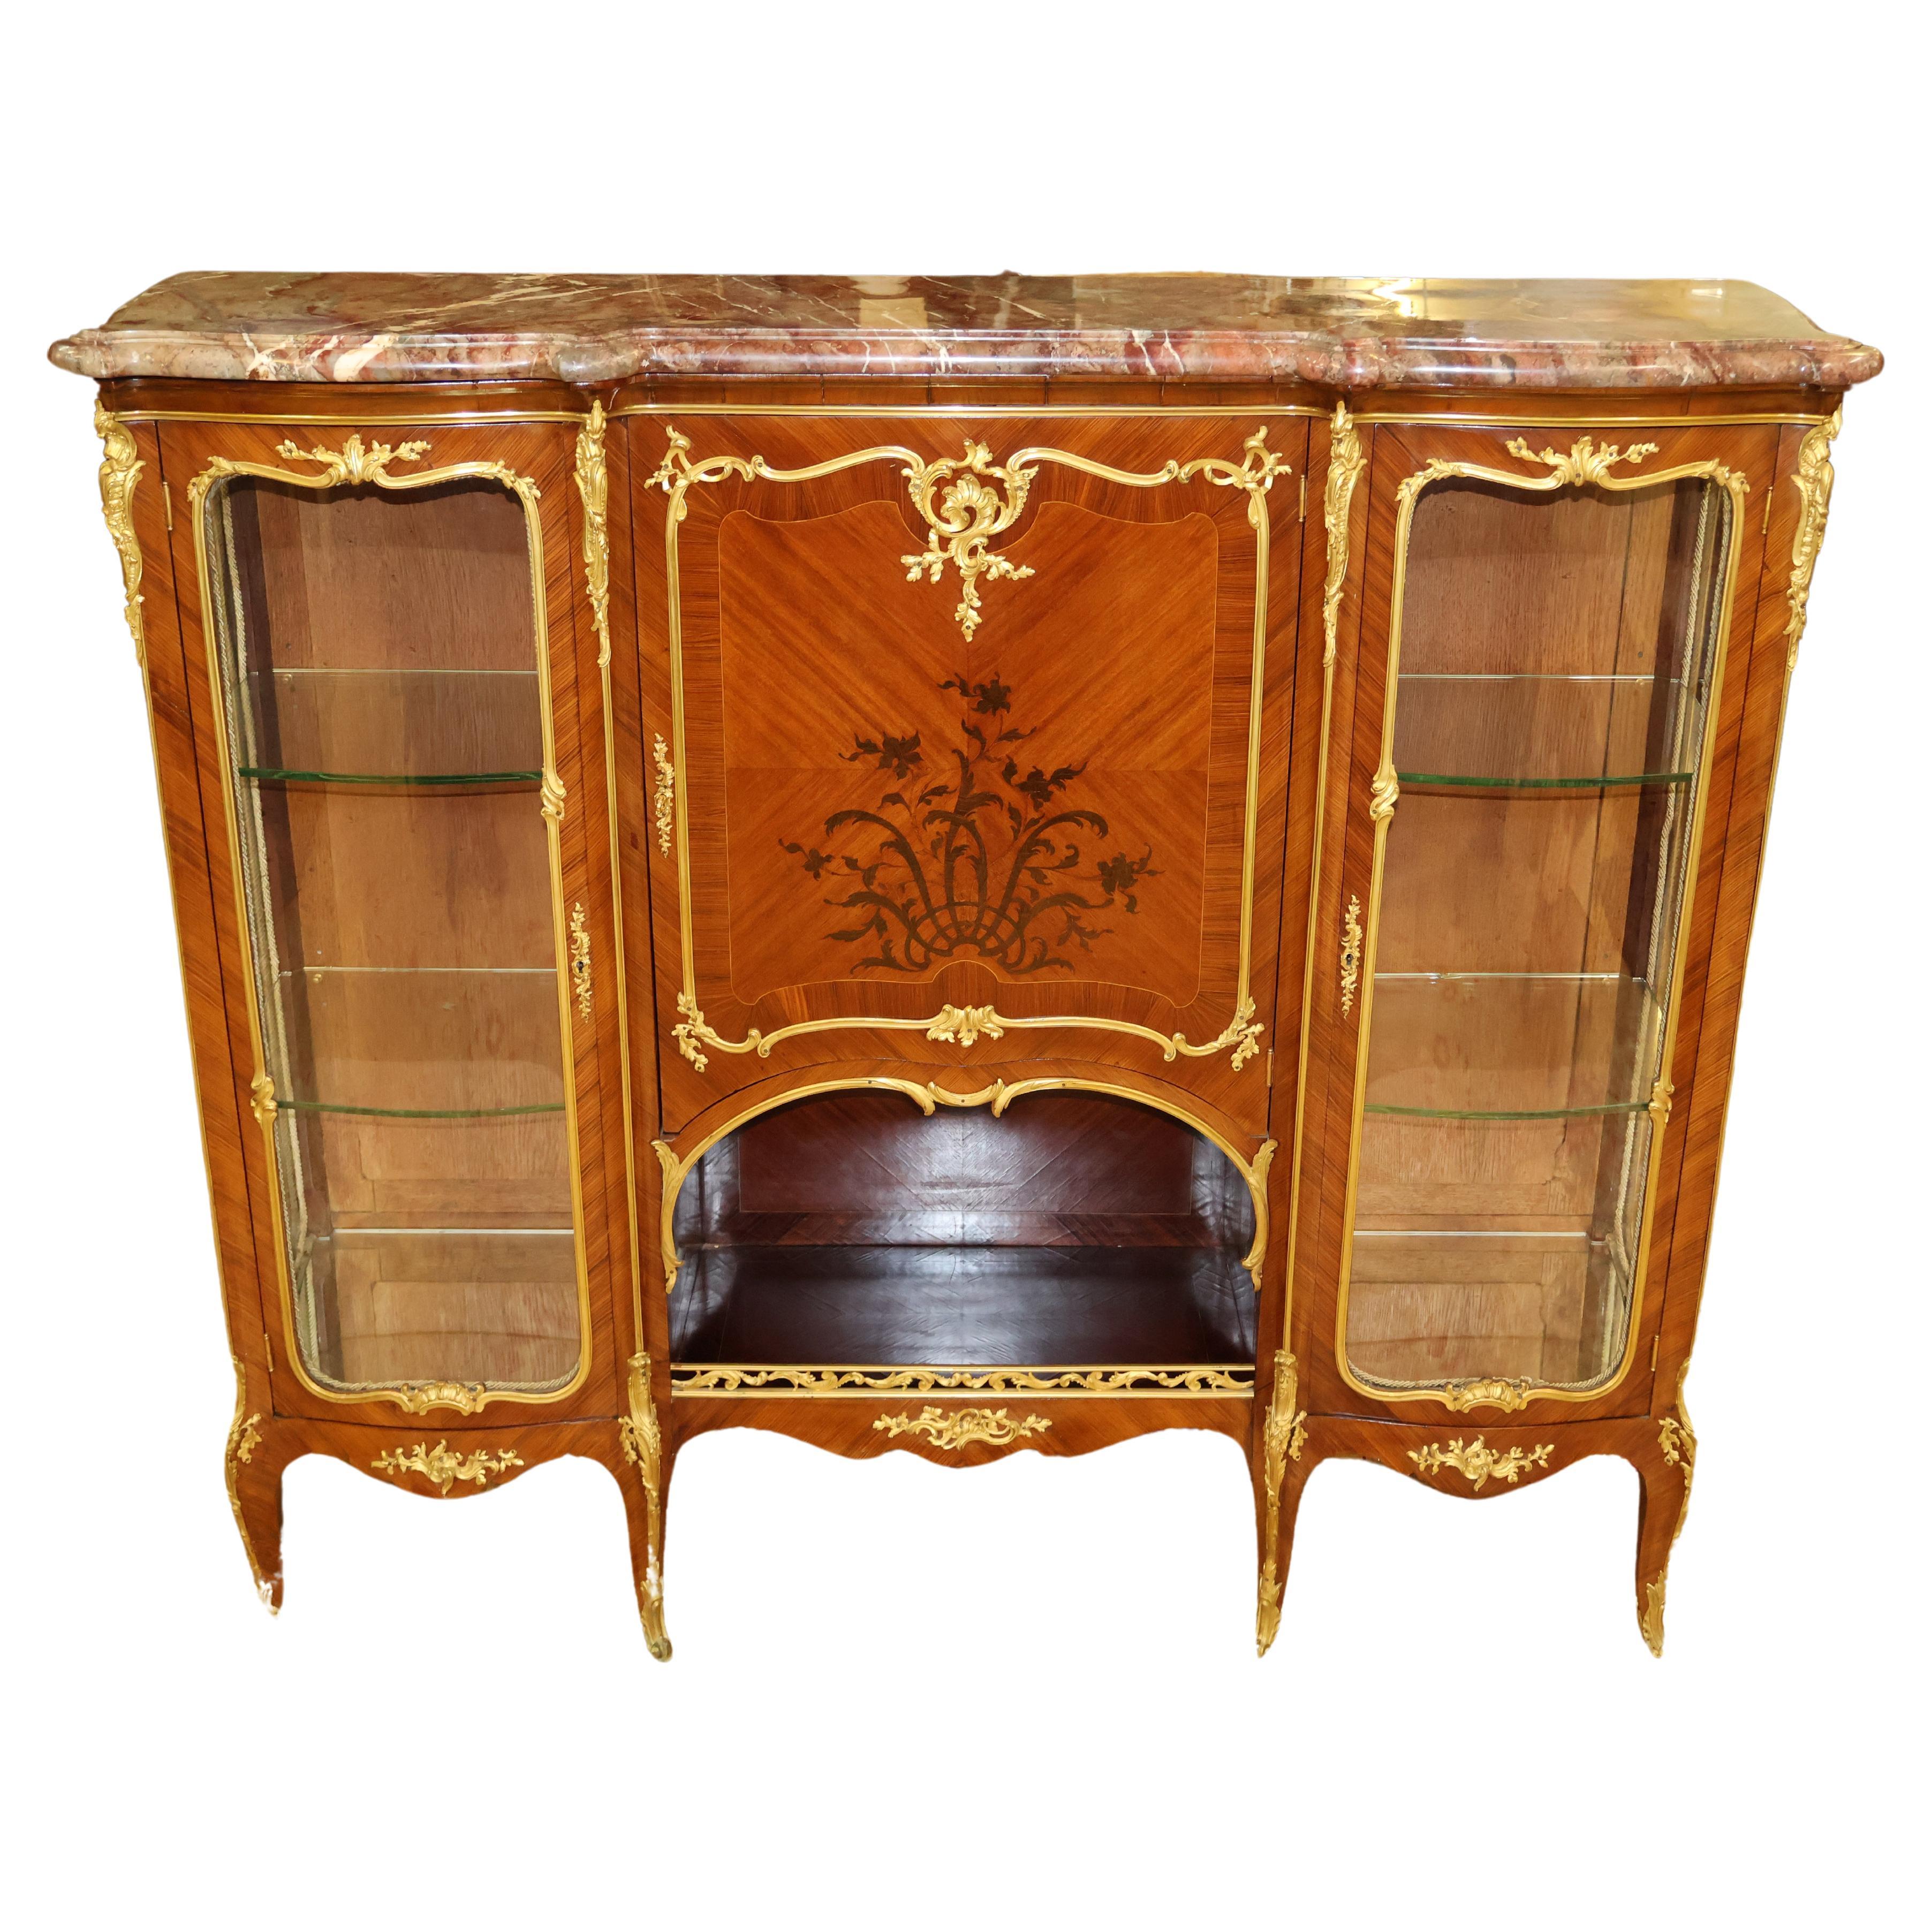 Marble Top French Ormolu Kingwood Inlaid Marquetry Vitrine Attributed To Linke For Sale